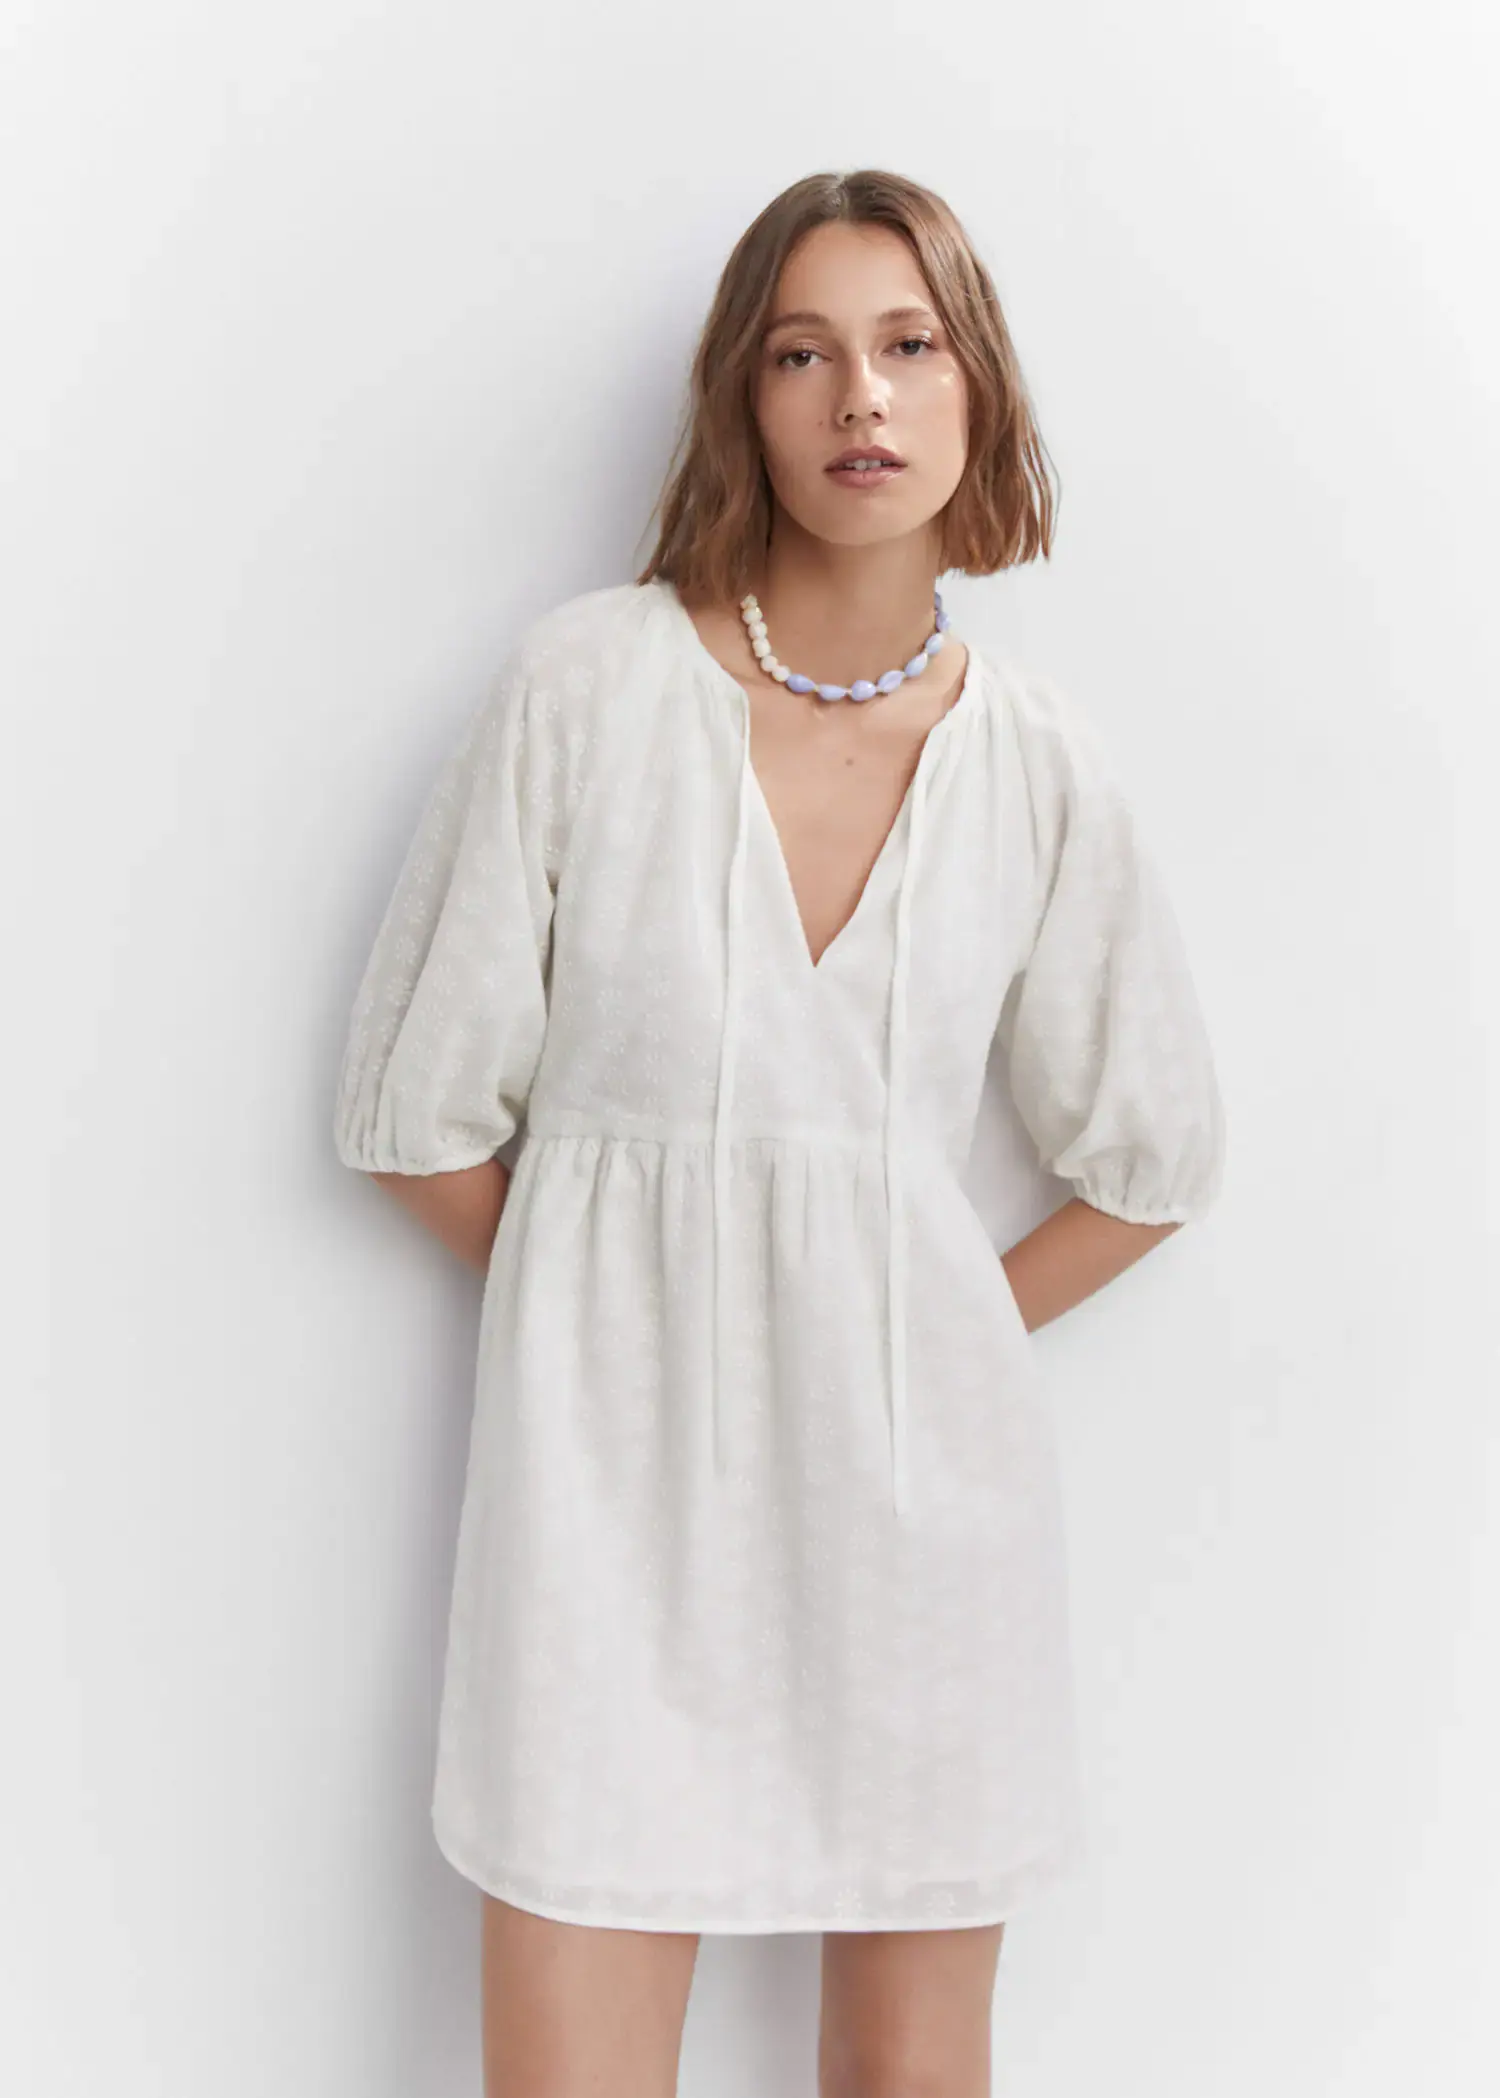 Mango Puff-sleeved embroidered dress. a woman wearing a white dress standing next to a wall. 